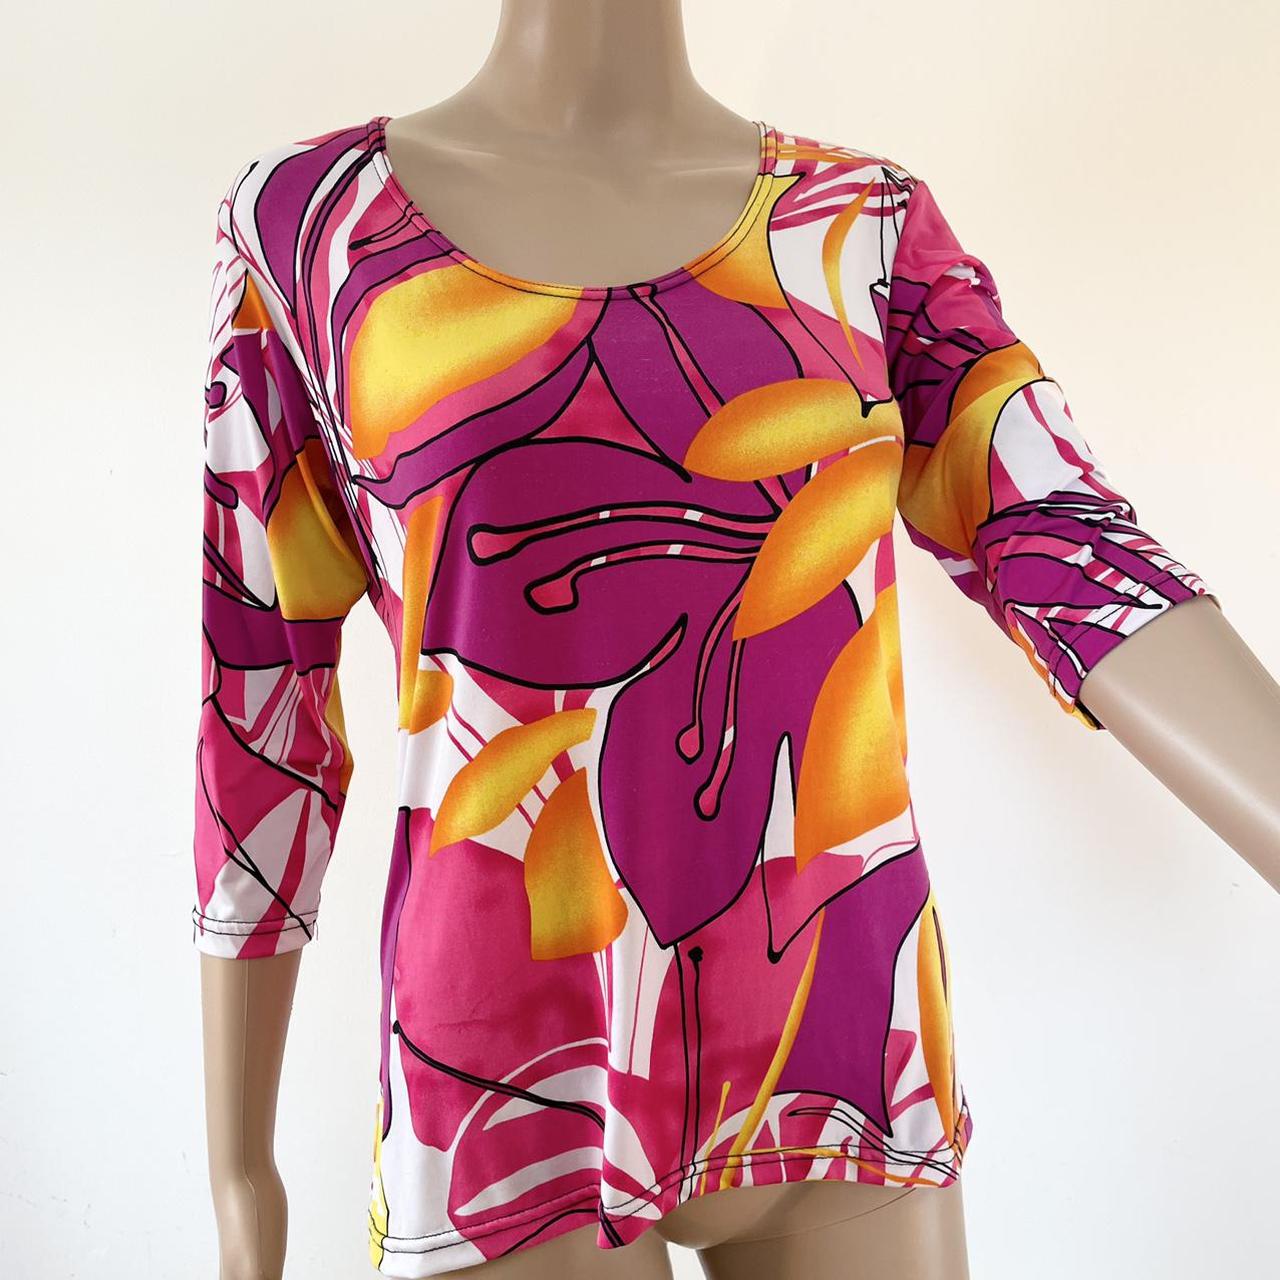 Product Image 1 - Vintage '90s Hawaiian Top

By "Wow"